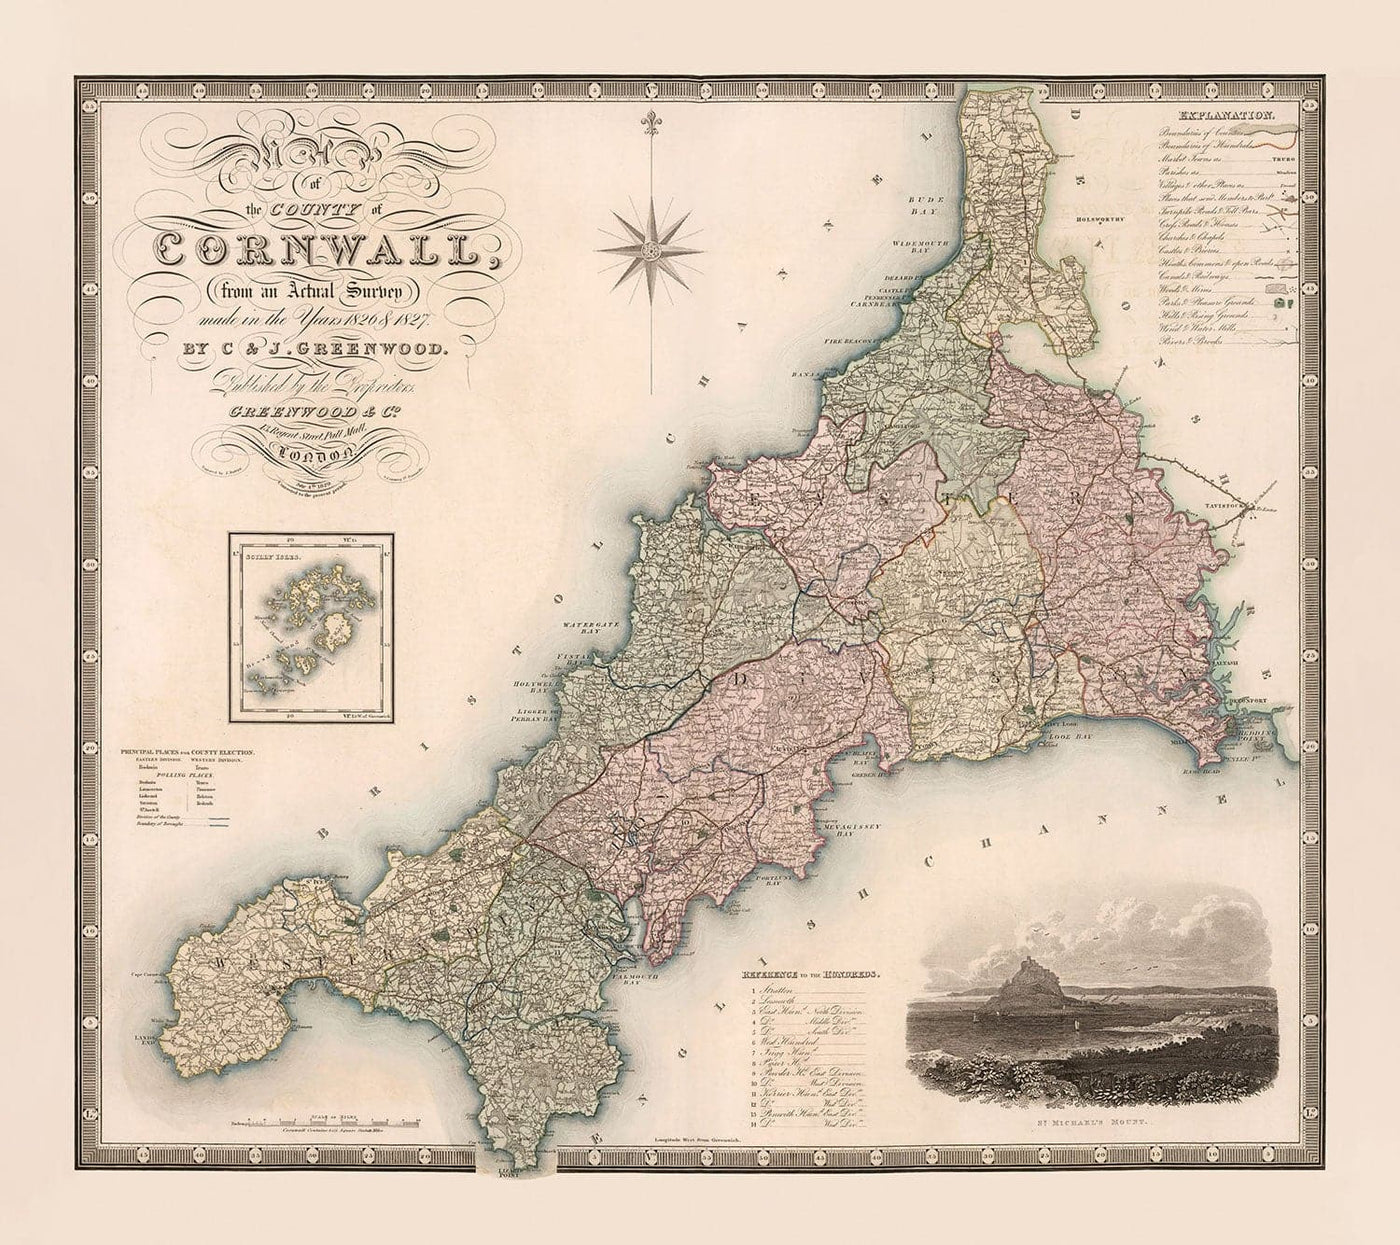 Viejo mapa de Cornwall y Scilly, 1829 de Greenwood & Co. - Penzance, St Ives, Plymouth, Tierres End, Padstow